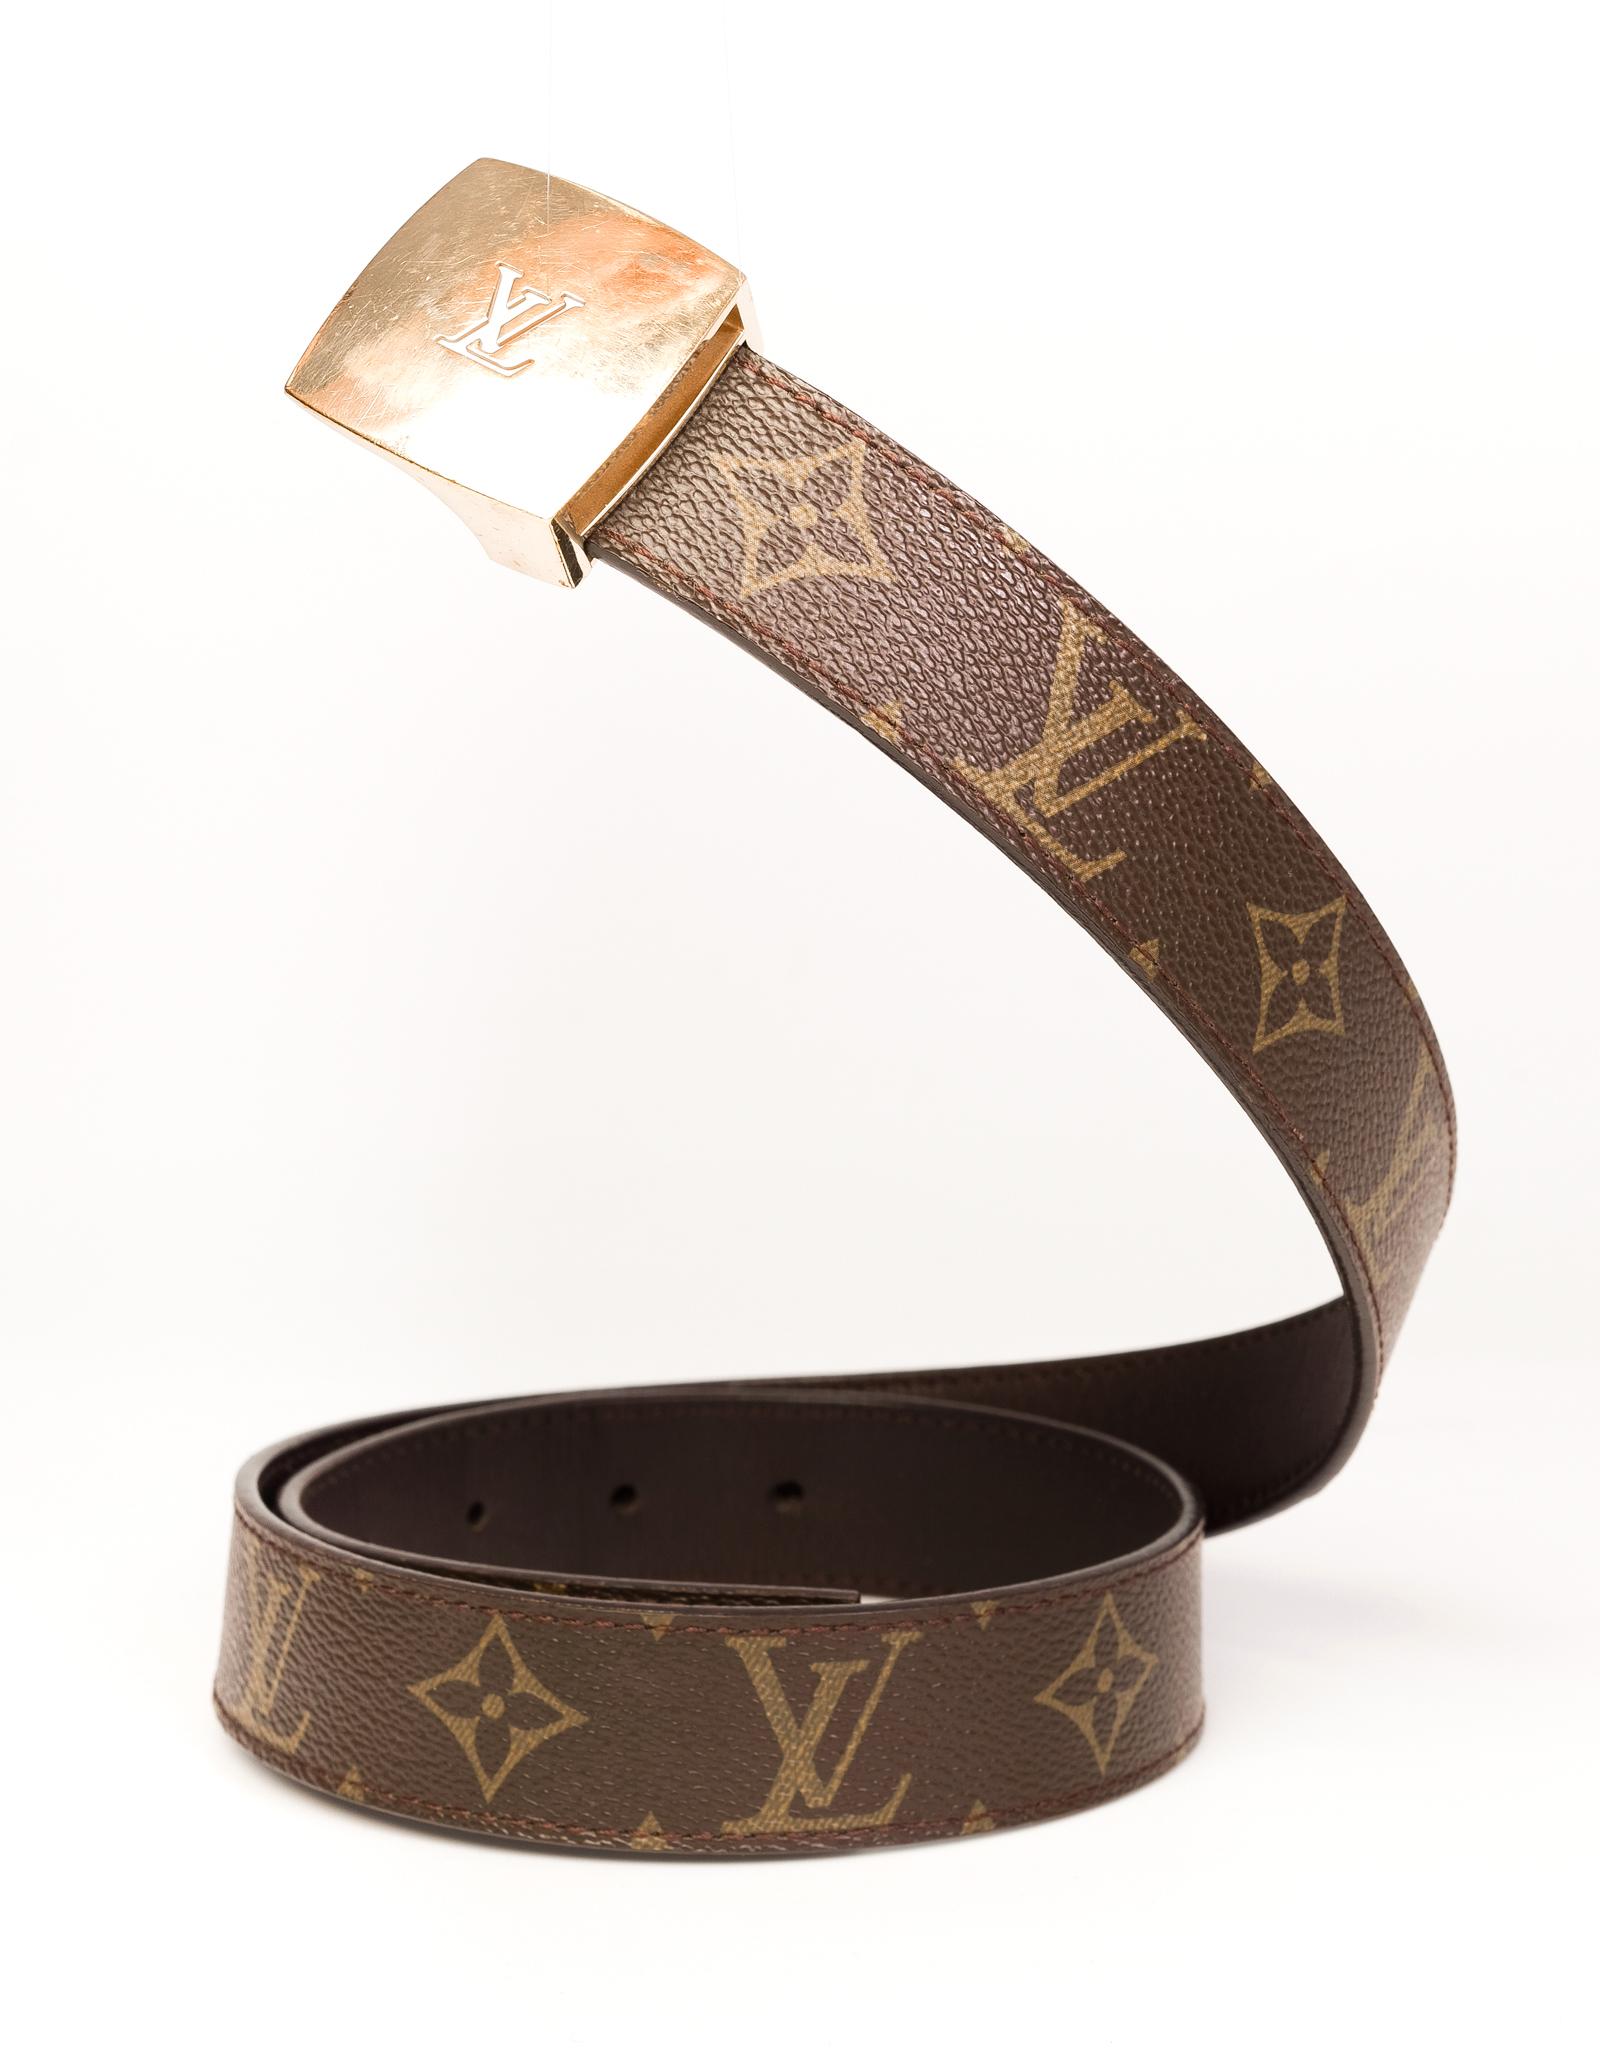 This vintage belt by Louis Vuitton is made with Monogram coated canvas and features a gold tone pull buckle. 

COLOR: Brown
MATERIAL: Coated canvas
SIZE: 80/32
COMES WITH: Dust bag
CONDITION: Very good  - buckle shows some scratches and some general